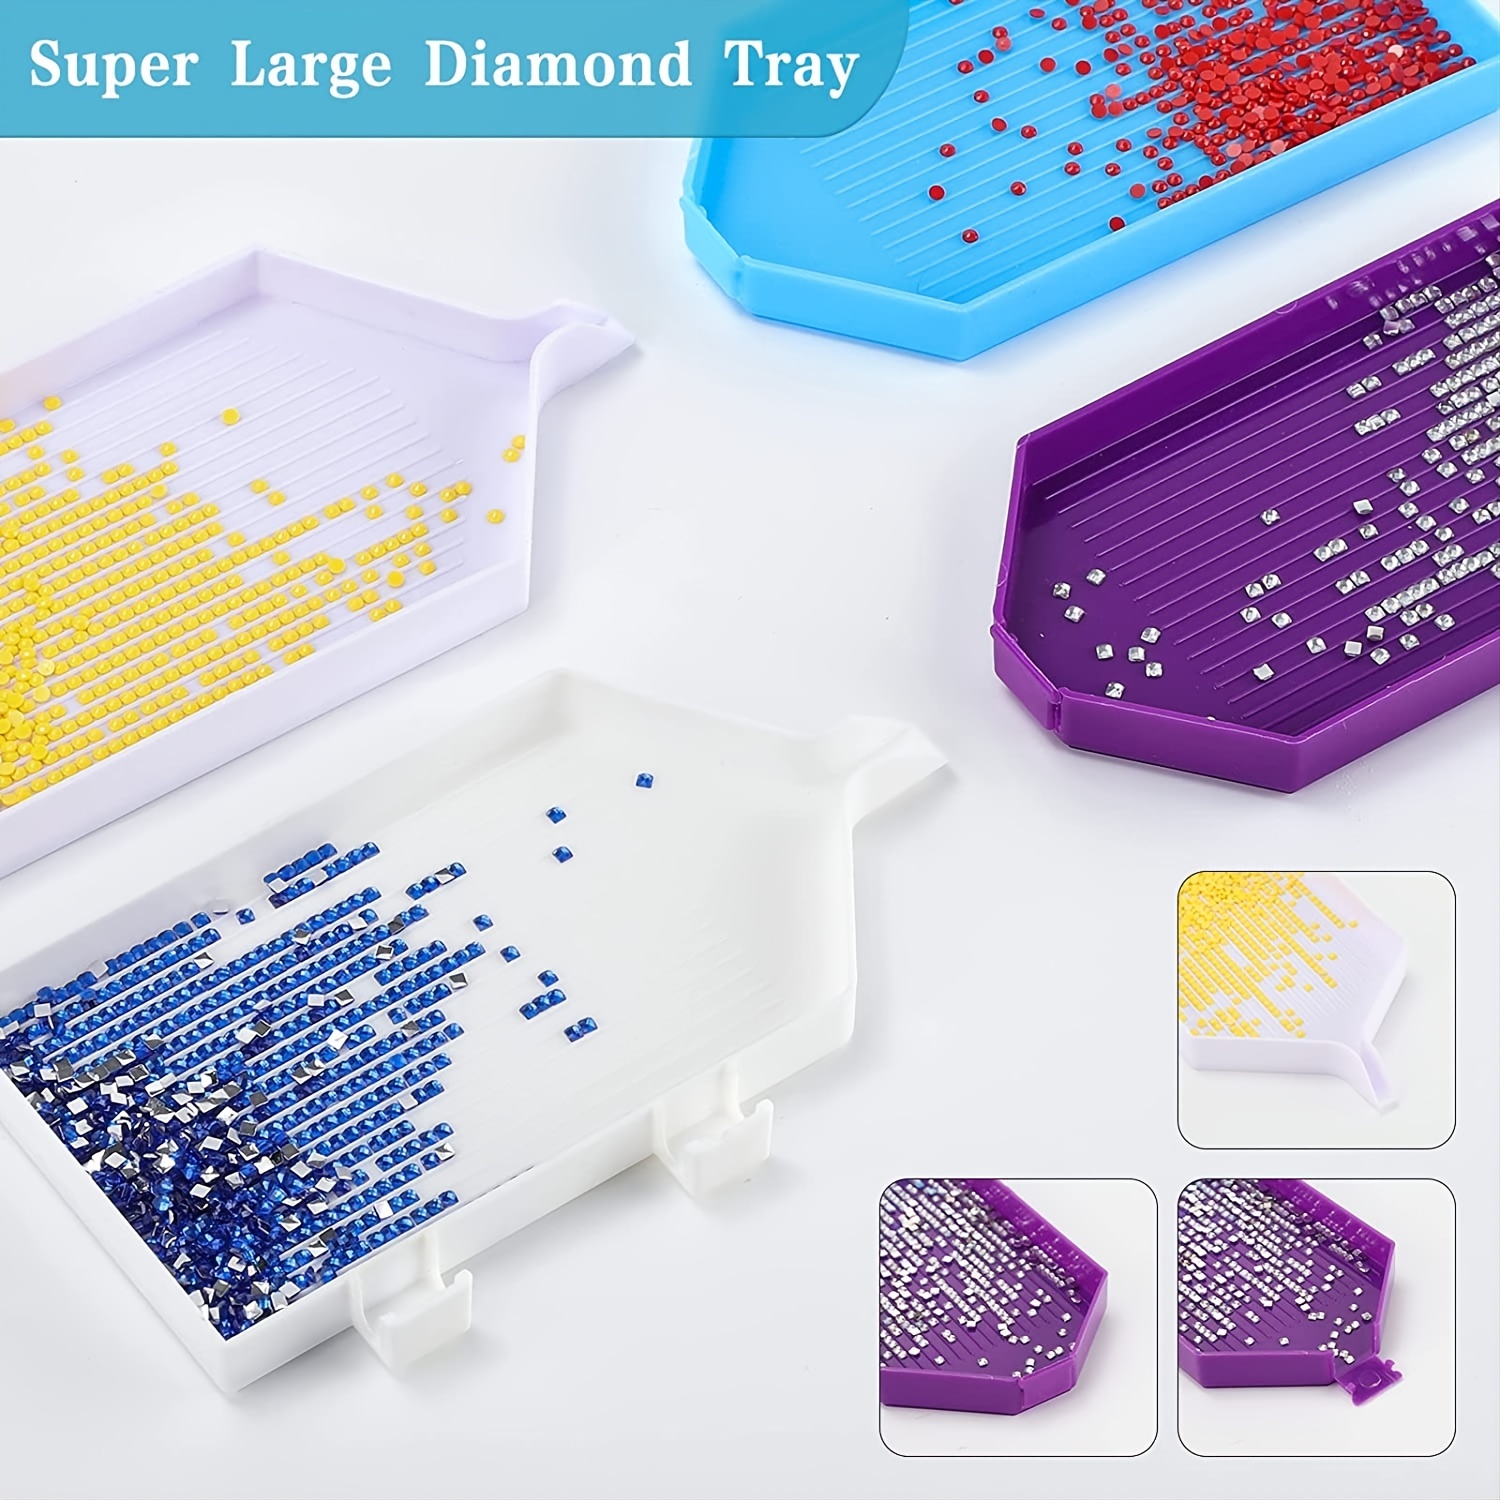 Mlife 33PCS 5D Diamond Painting Tool Kit - 5D DIY Diamond Painting  Accessories with Diamond Painting Roller and Diamond Embroidery Box for  Adults or